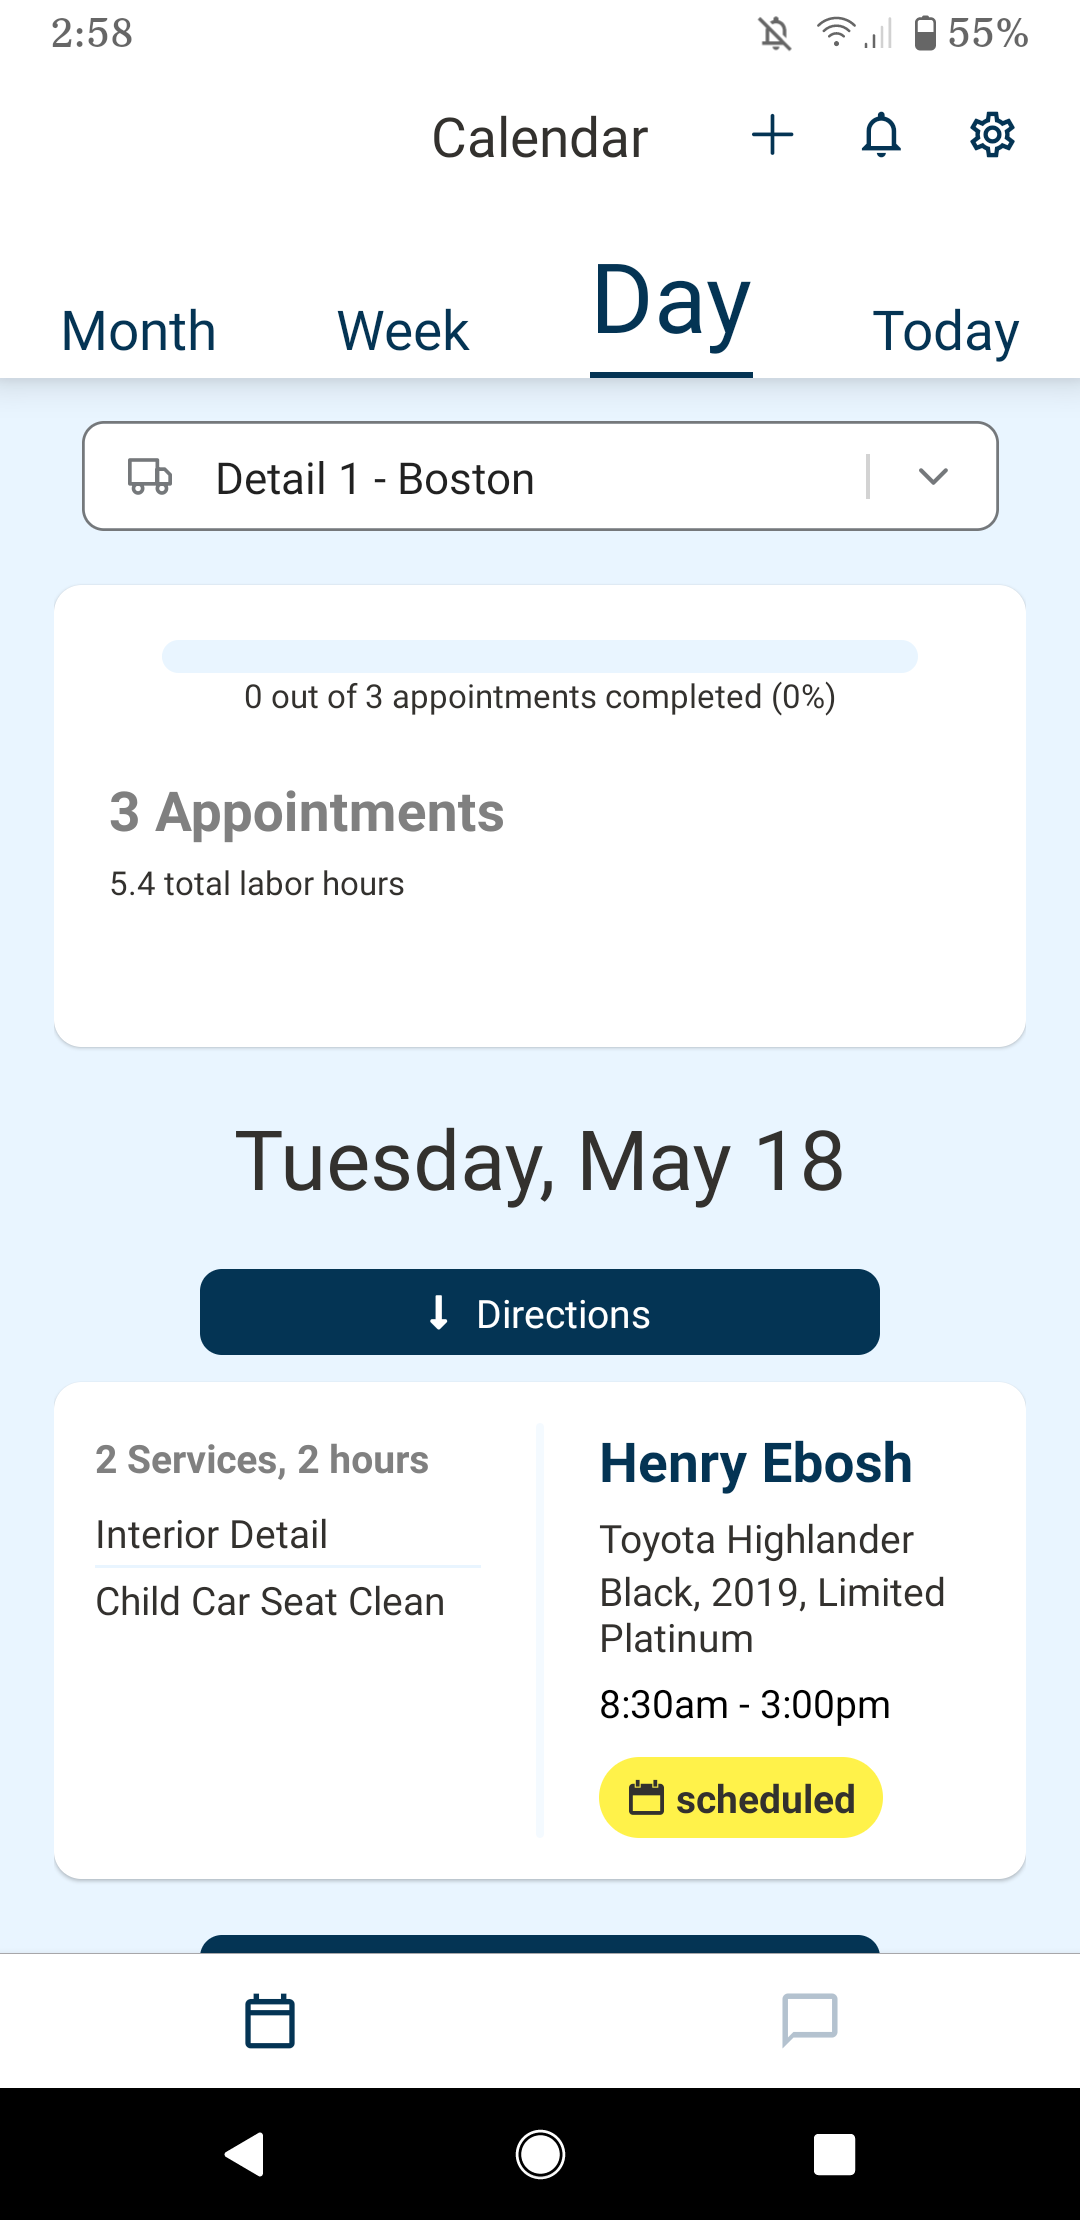 The calendar view in the technician app gives the technician a full view of their day, week or month. Technicians can plan out their days and can be instantly notified here with any service updates from the customer or administrator.